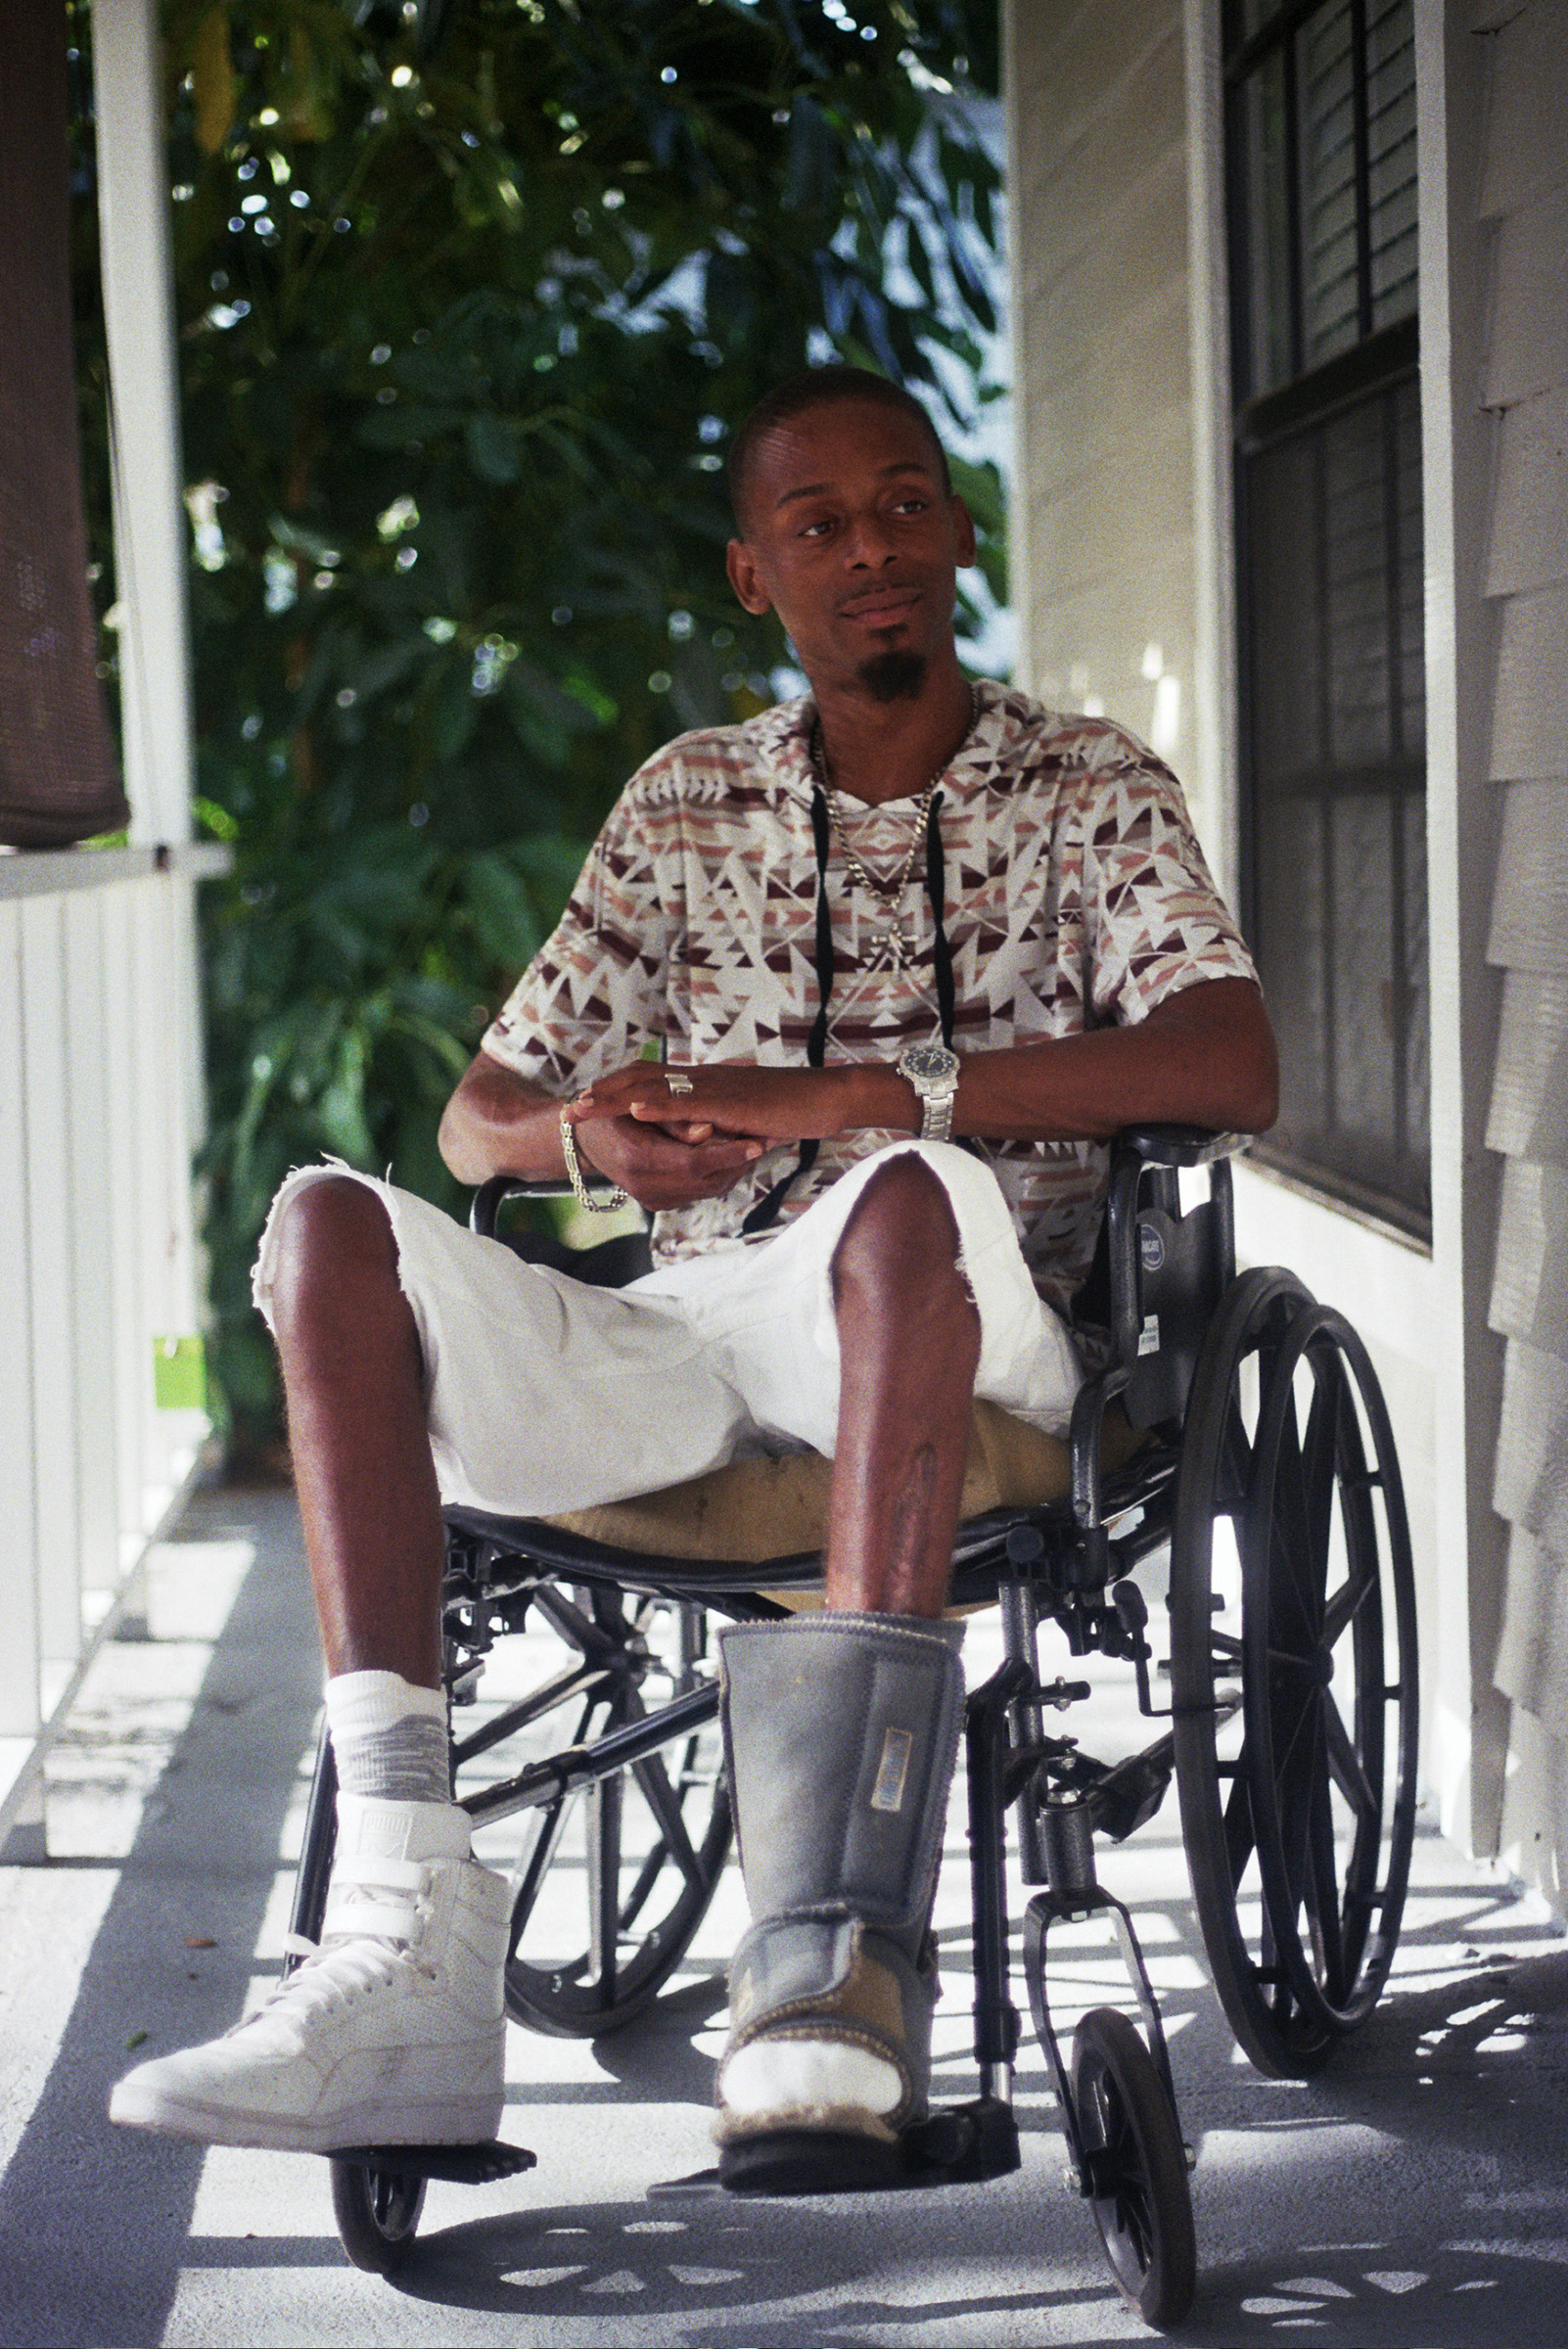 Florida shooting survivor Keinon Carter at his home in June 2017. (Joey Roulette)